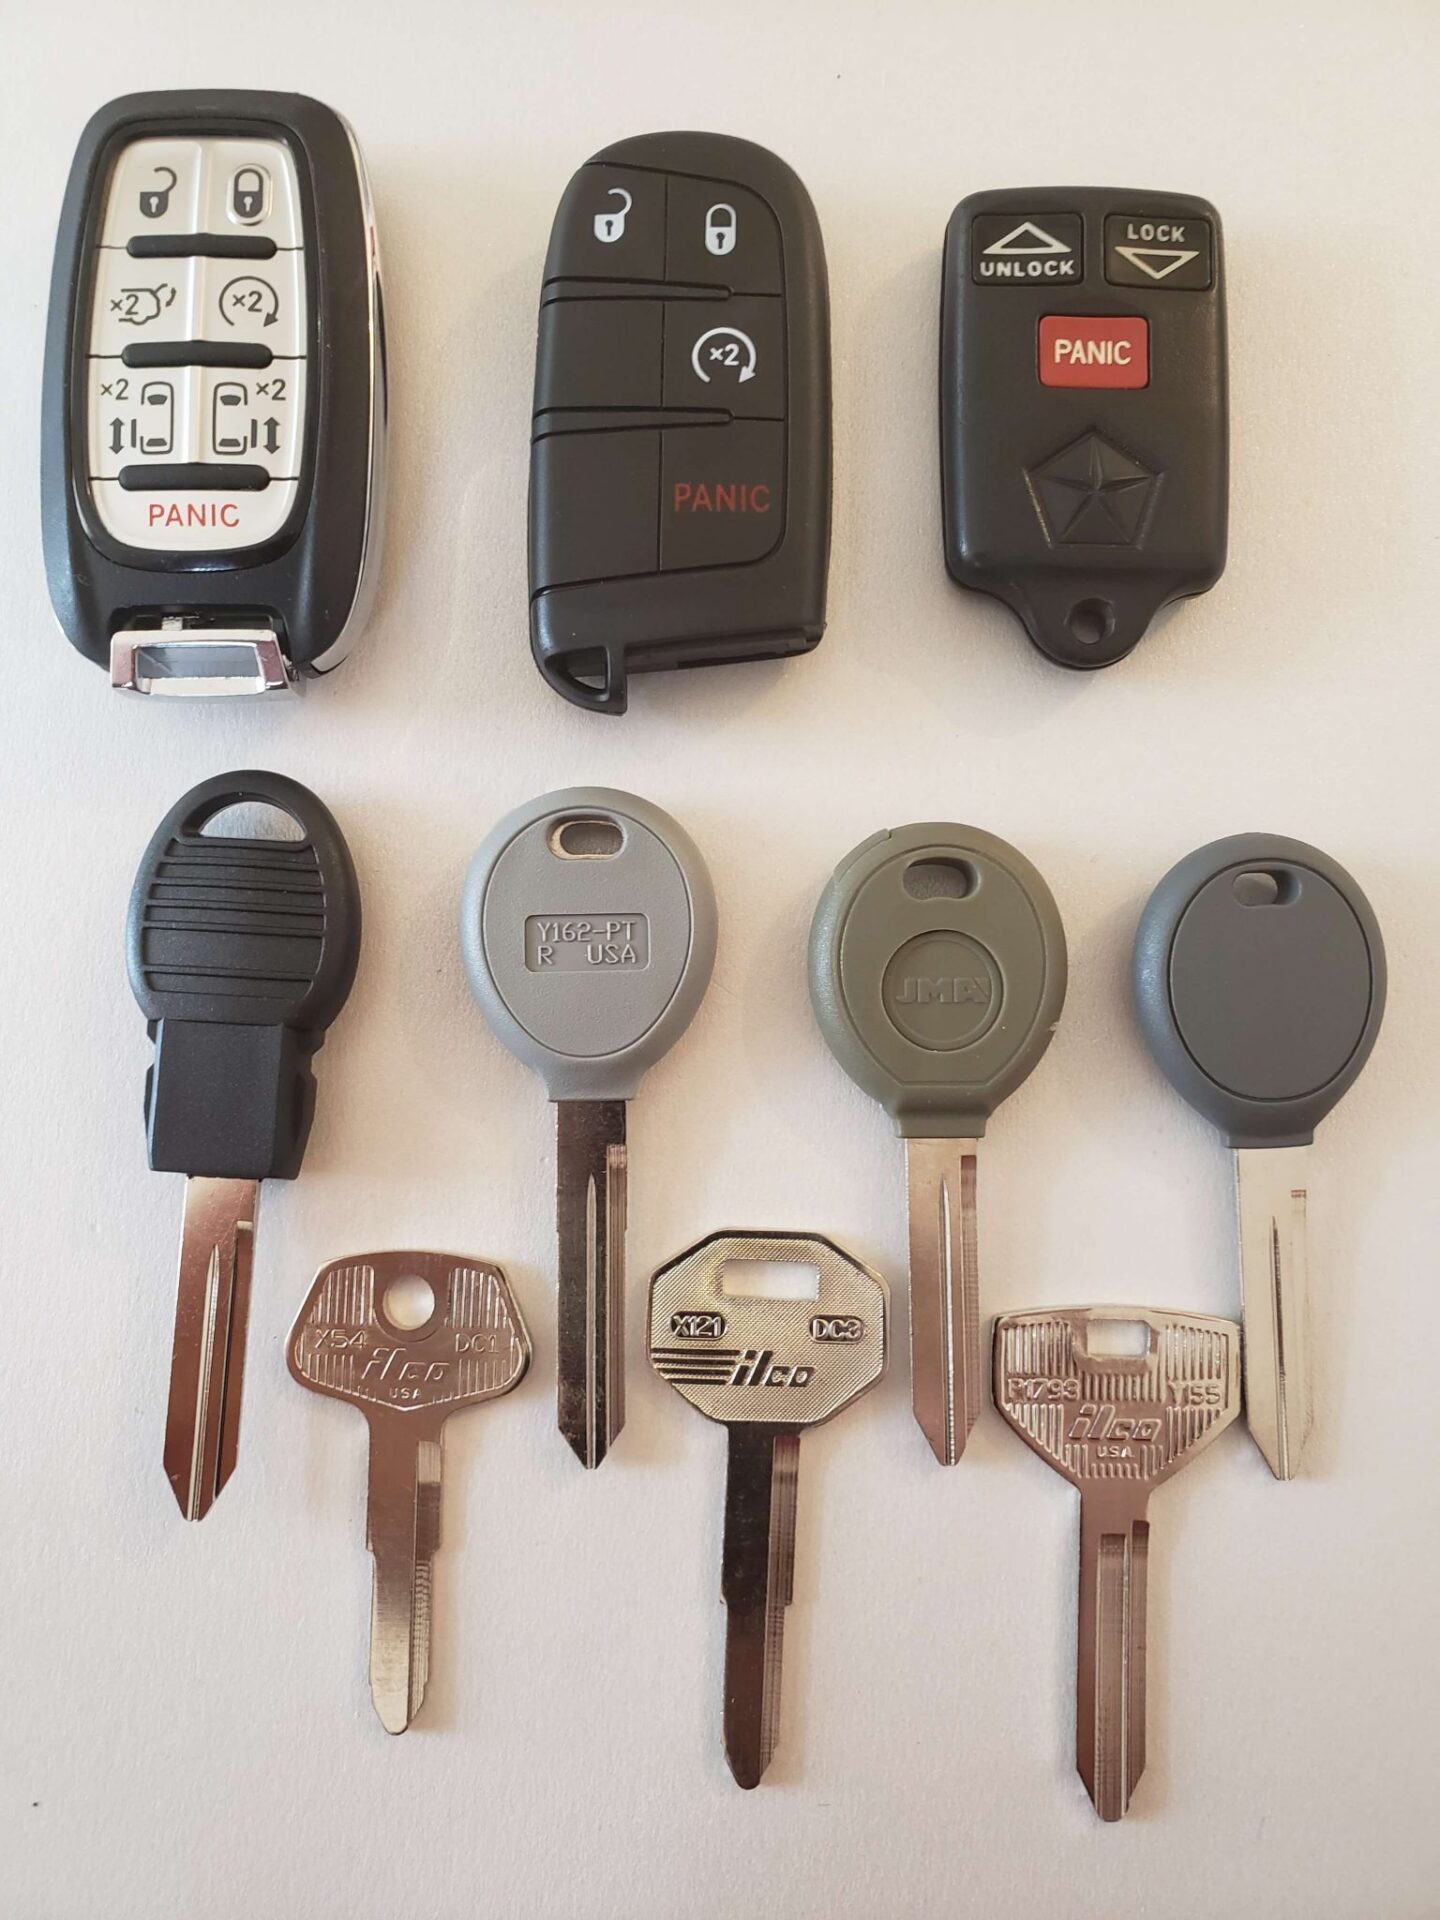 Dodge Journey Replacement Keys - What To Do, Options, Cost & More